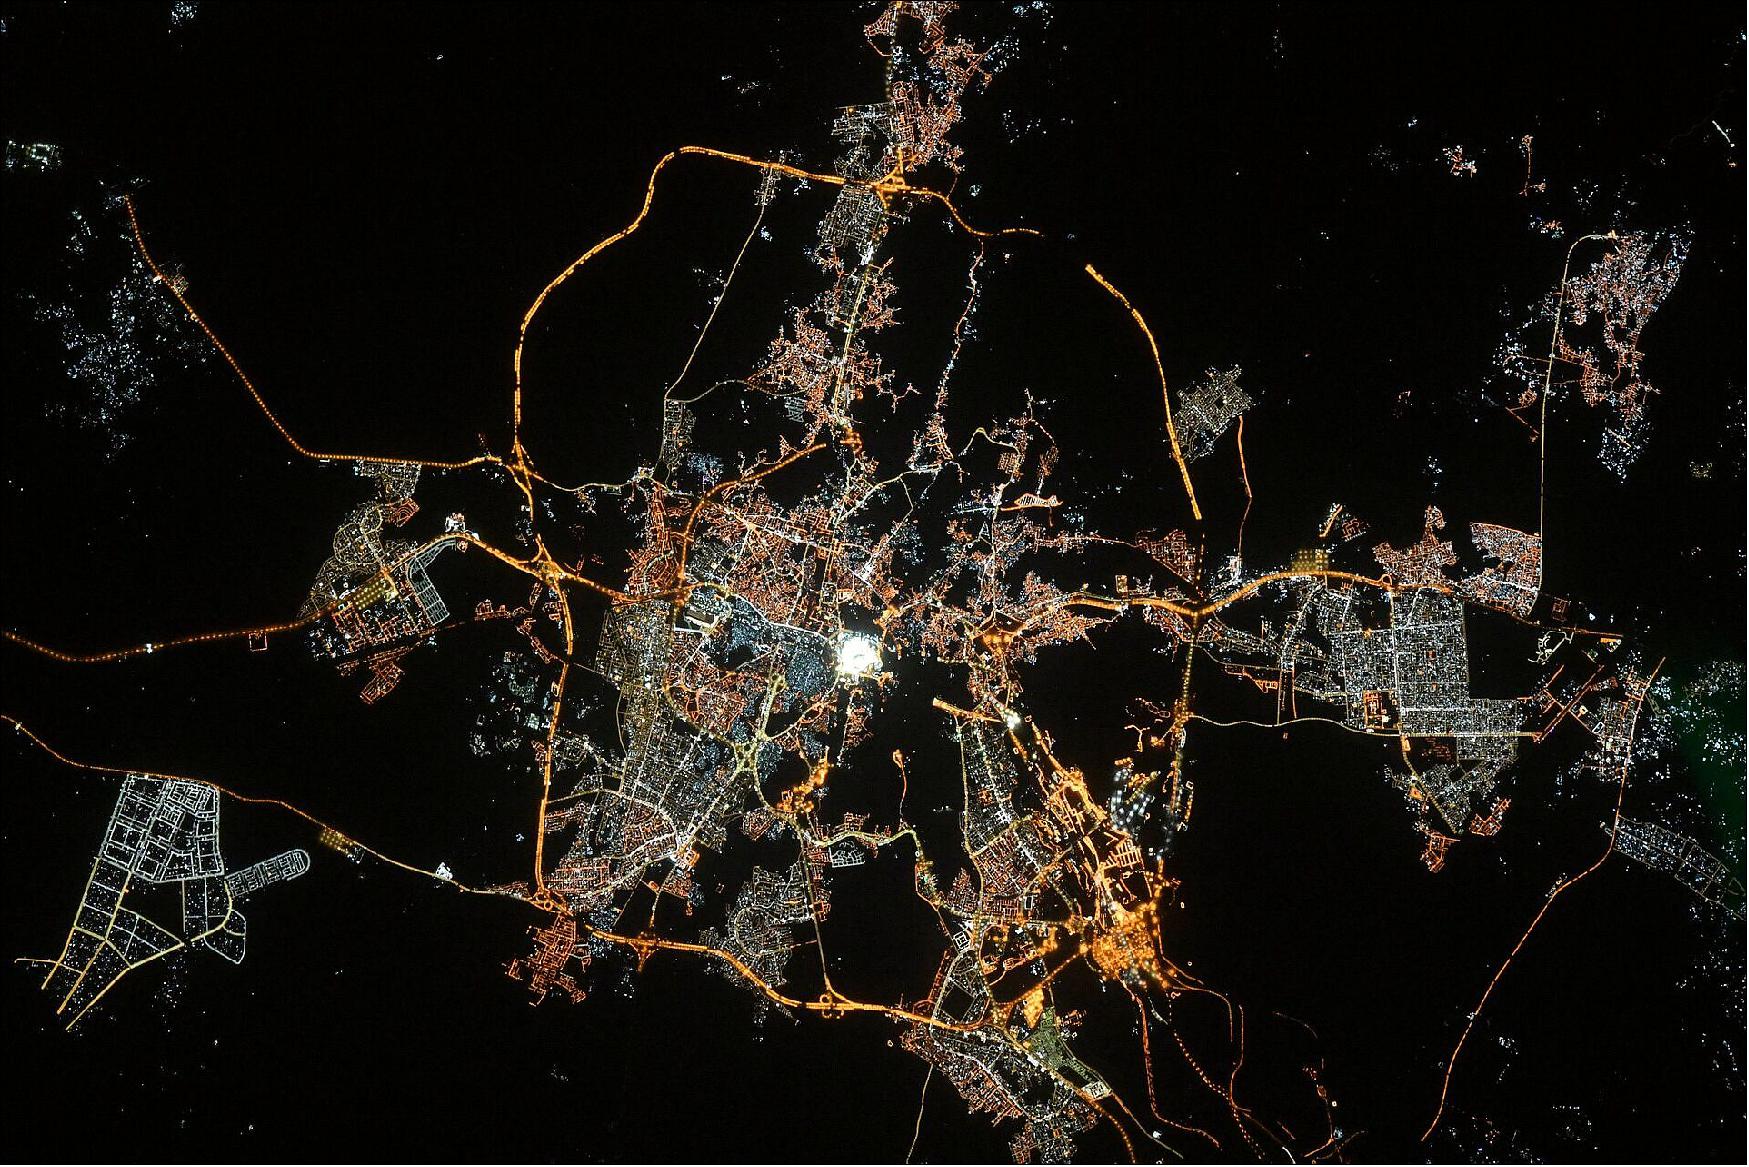 Figure 87: ESA astronaut Thomas Pesquet snapped this image of the city of Mecca in Saudi Arabia during his second long-duration mission known as Alpha. He posted it on social media saying "So bright at night that it ended up overexposed, as I wanted to see the city lights too. Happy end of Ramadan!" (image credit: ESA/NASA–T. Pesquet)